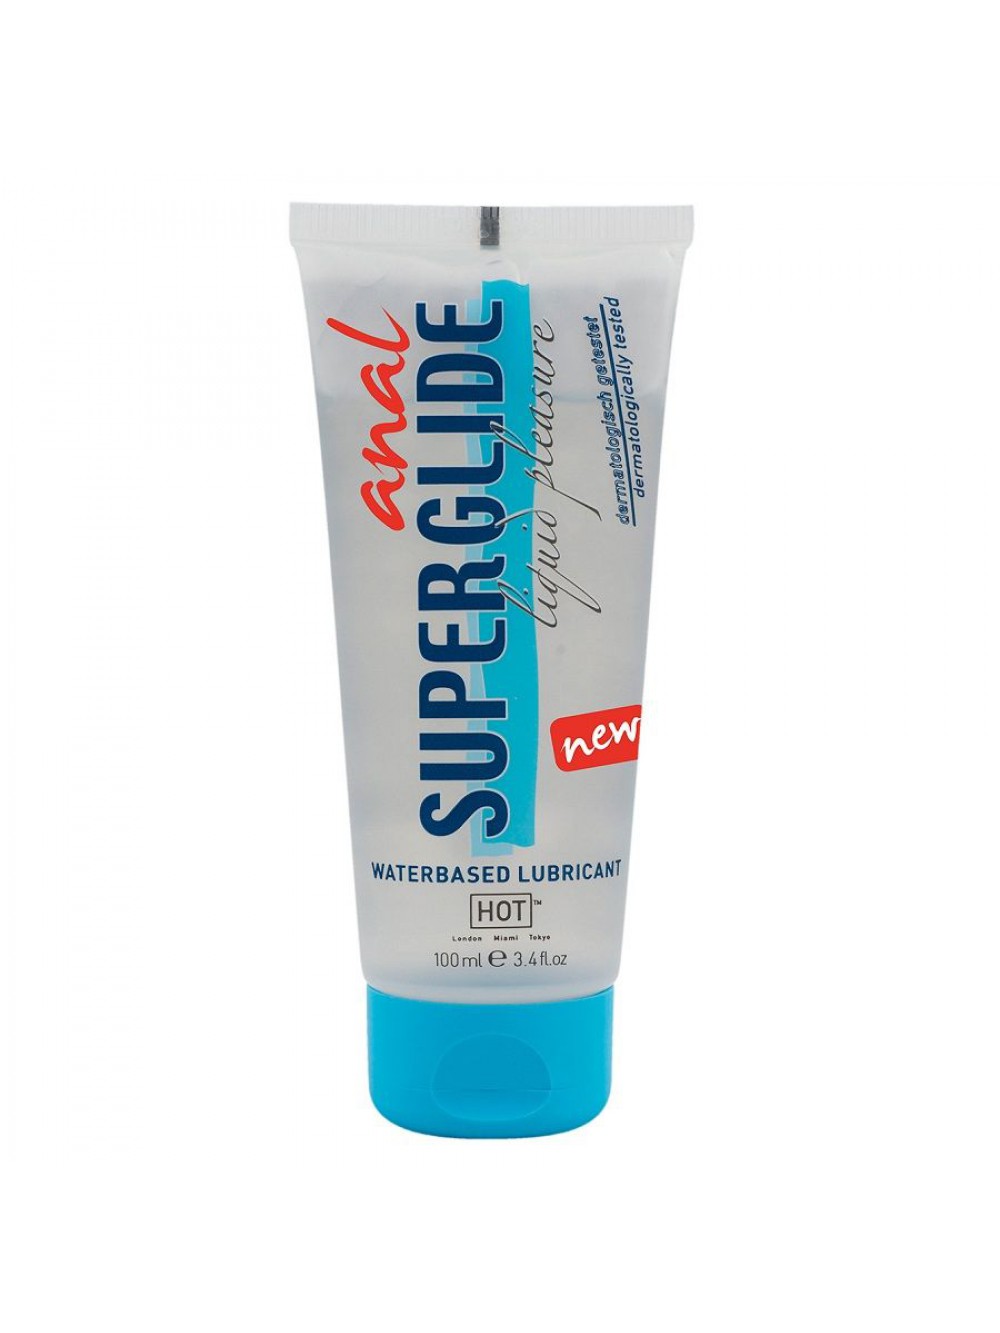 ANAL SUPERGLIDE WATERBASED LUBRICANT 100 ML 4042342002690